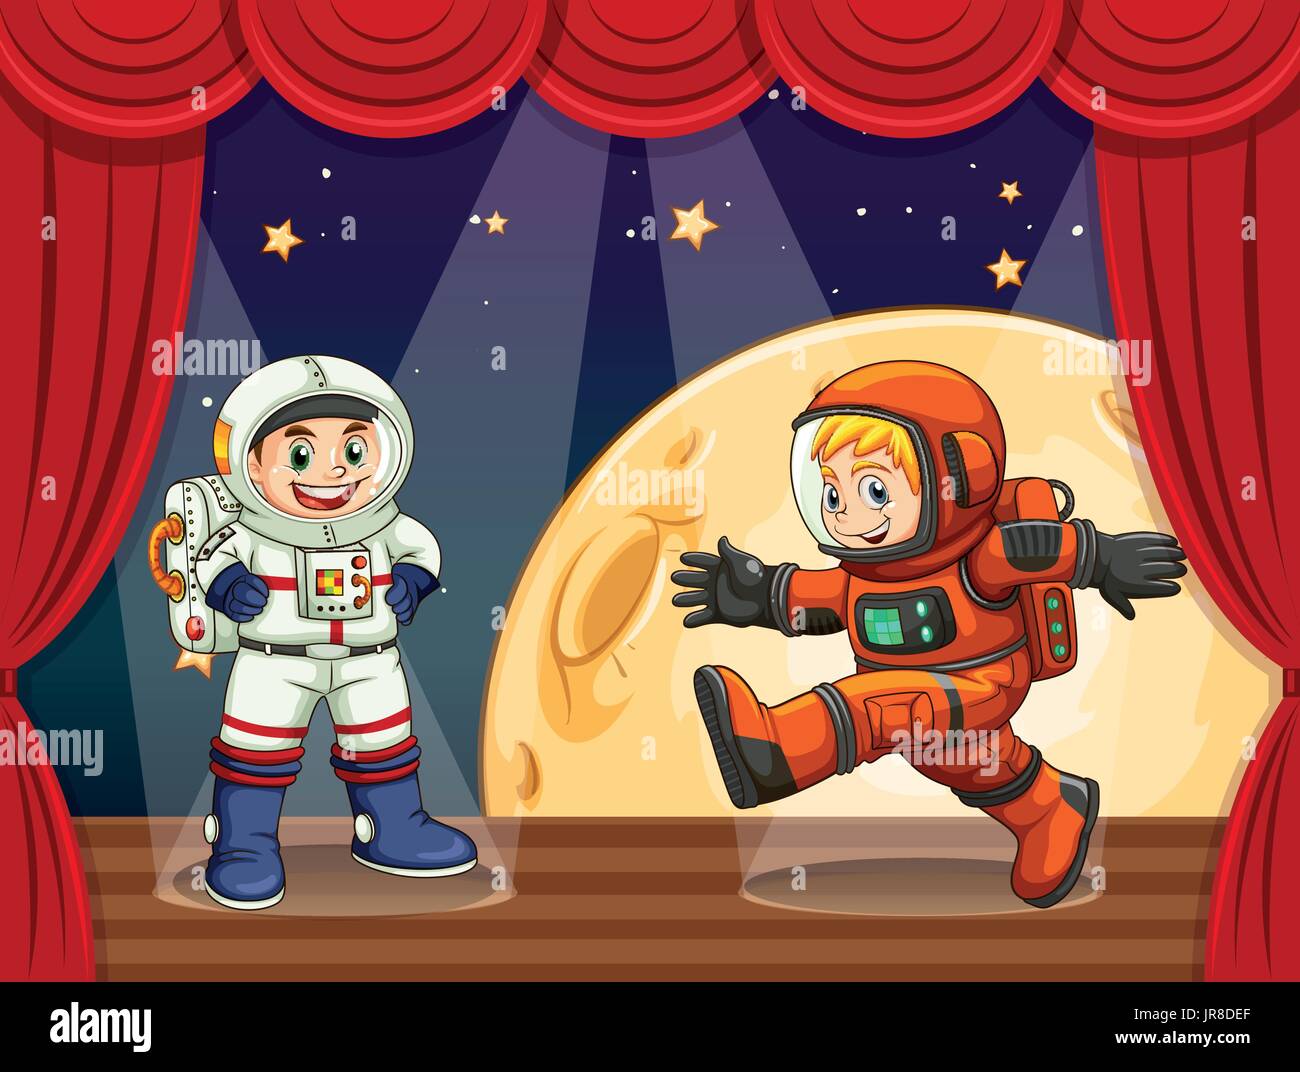 Two astronauts walking on stage illustration Stock Vector